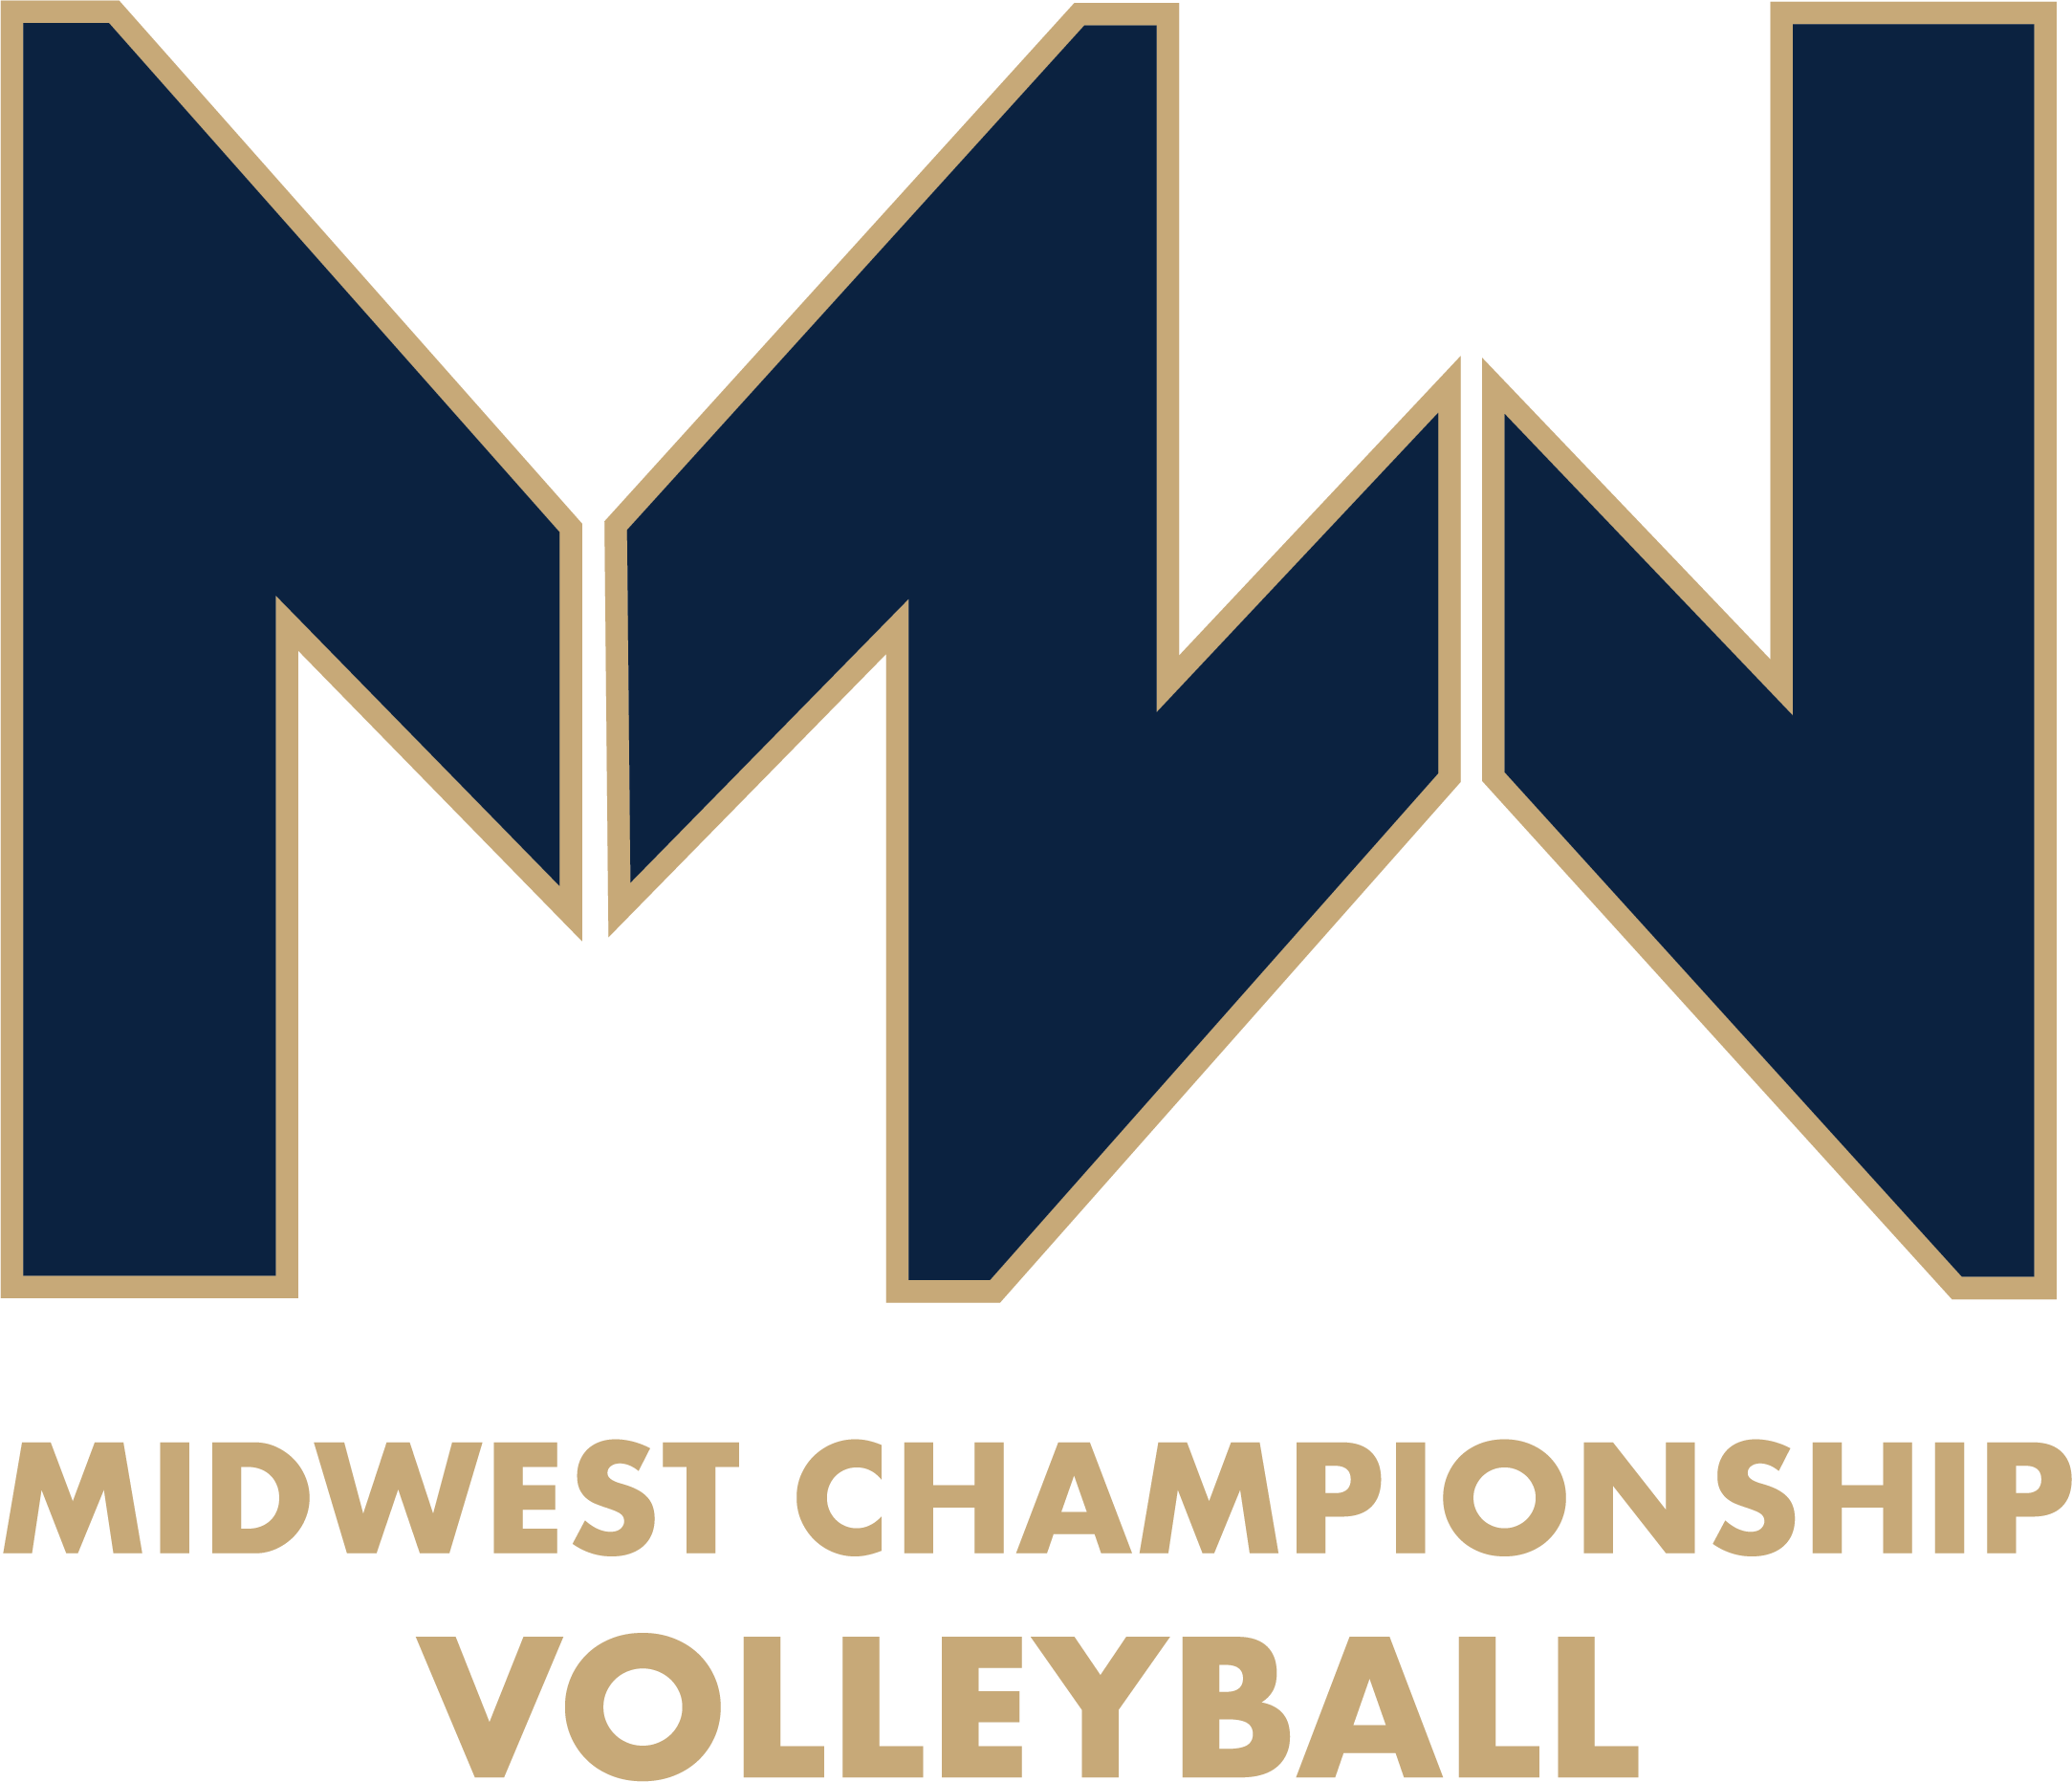 Midwest Championship Volleyball